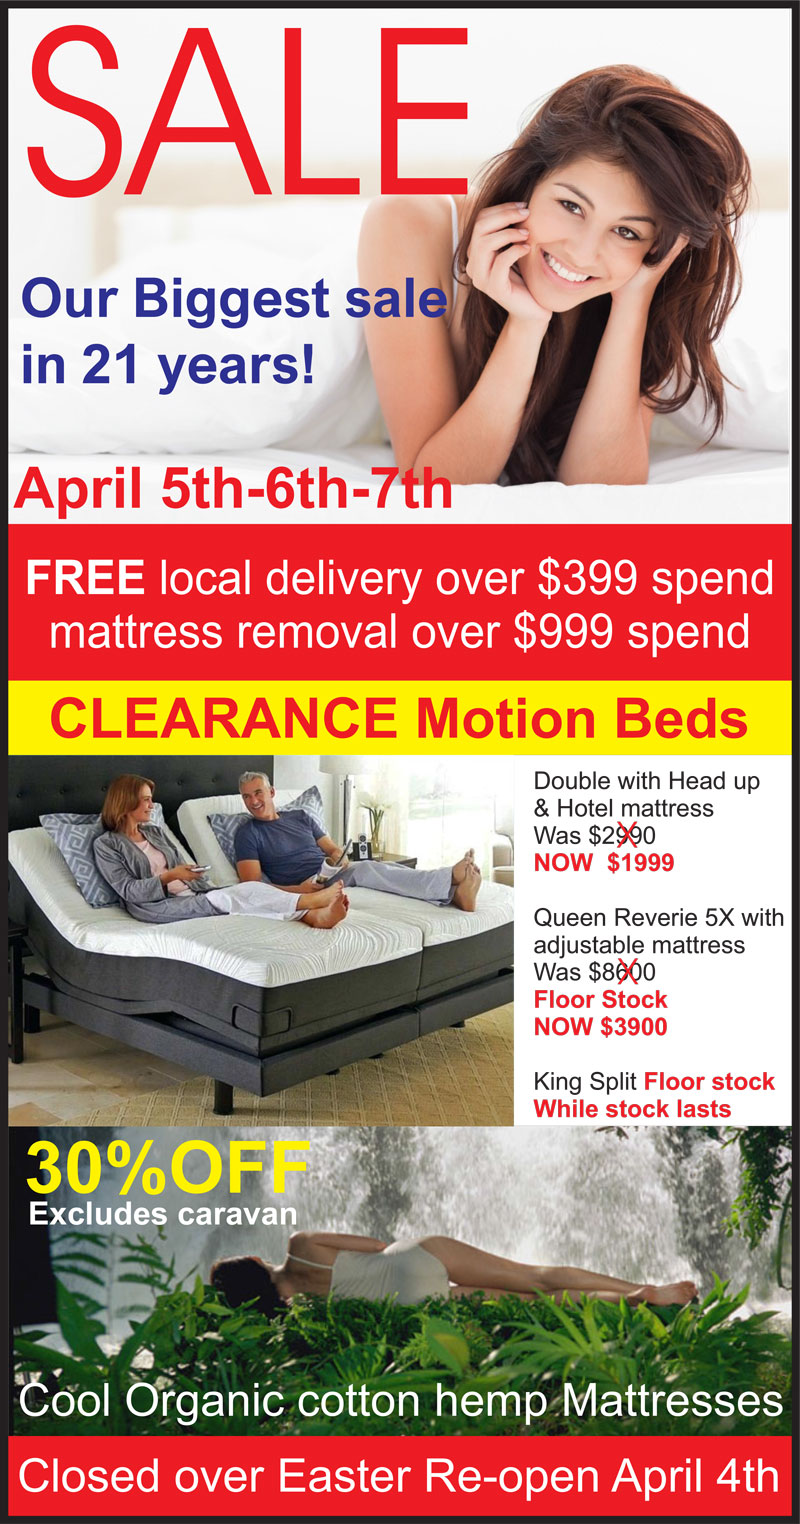 Mattresses Direct To Public Post Easter Mattress Sale - Huge Savings on Australian Made Mattresses including Organic Cotton & Hemp Mattresses. Plus Great Prices Clearance Motion Beds.